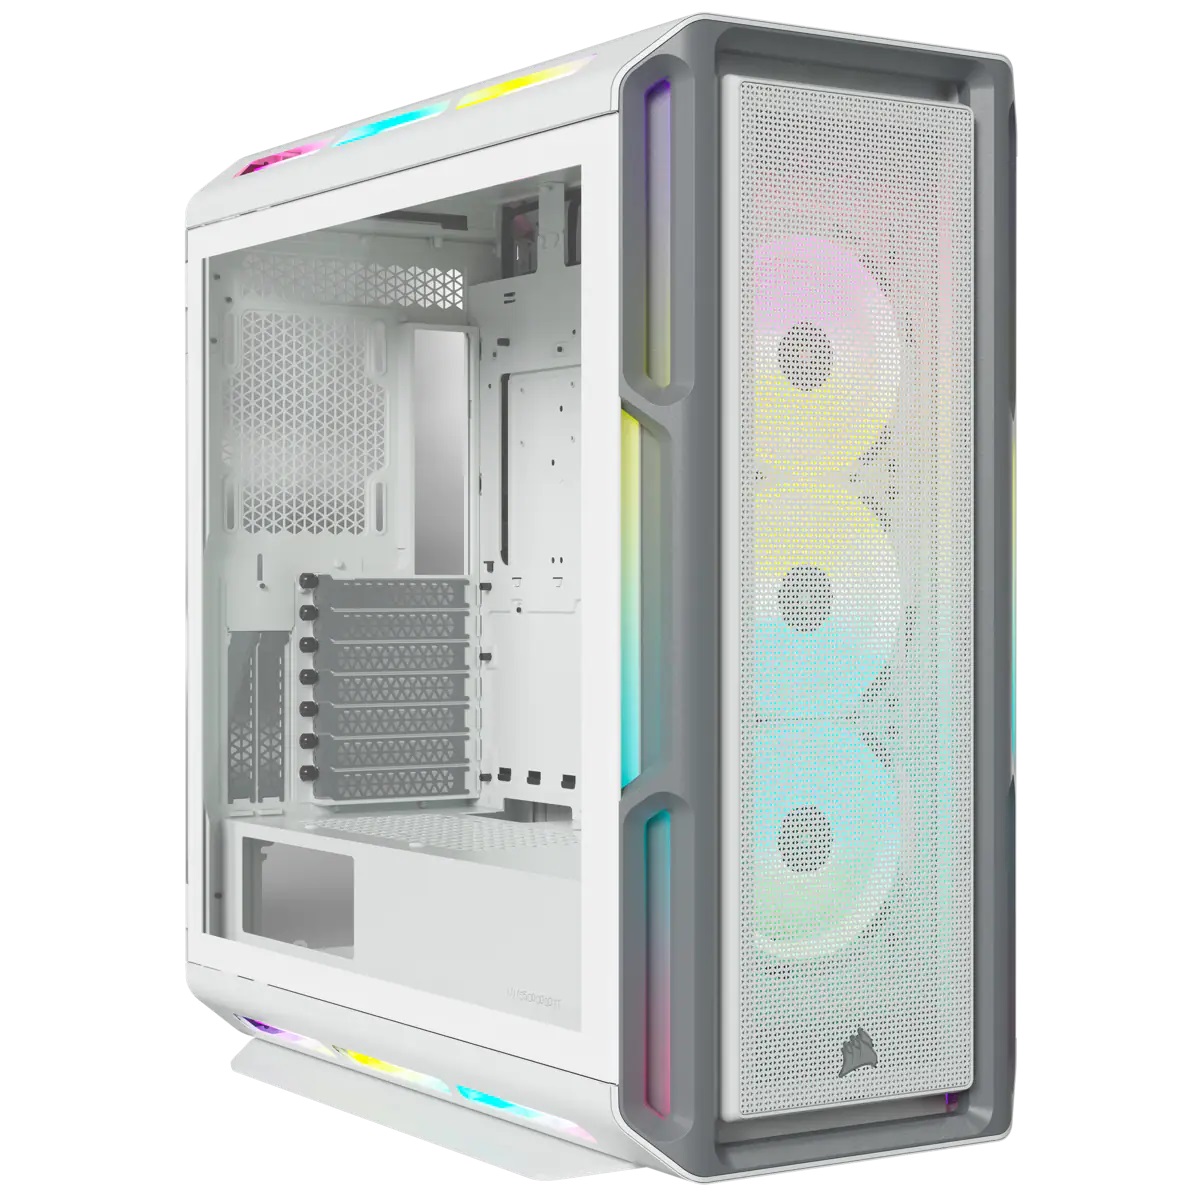 Vỏ Case CORSAIR iCUE 5000T RGB Tempered Glass Mid-Tower ATX PC Case - White